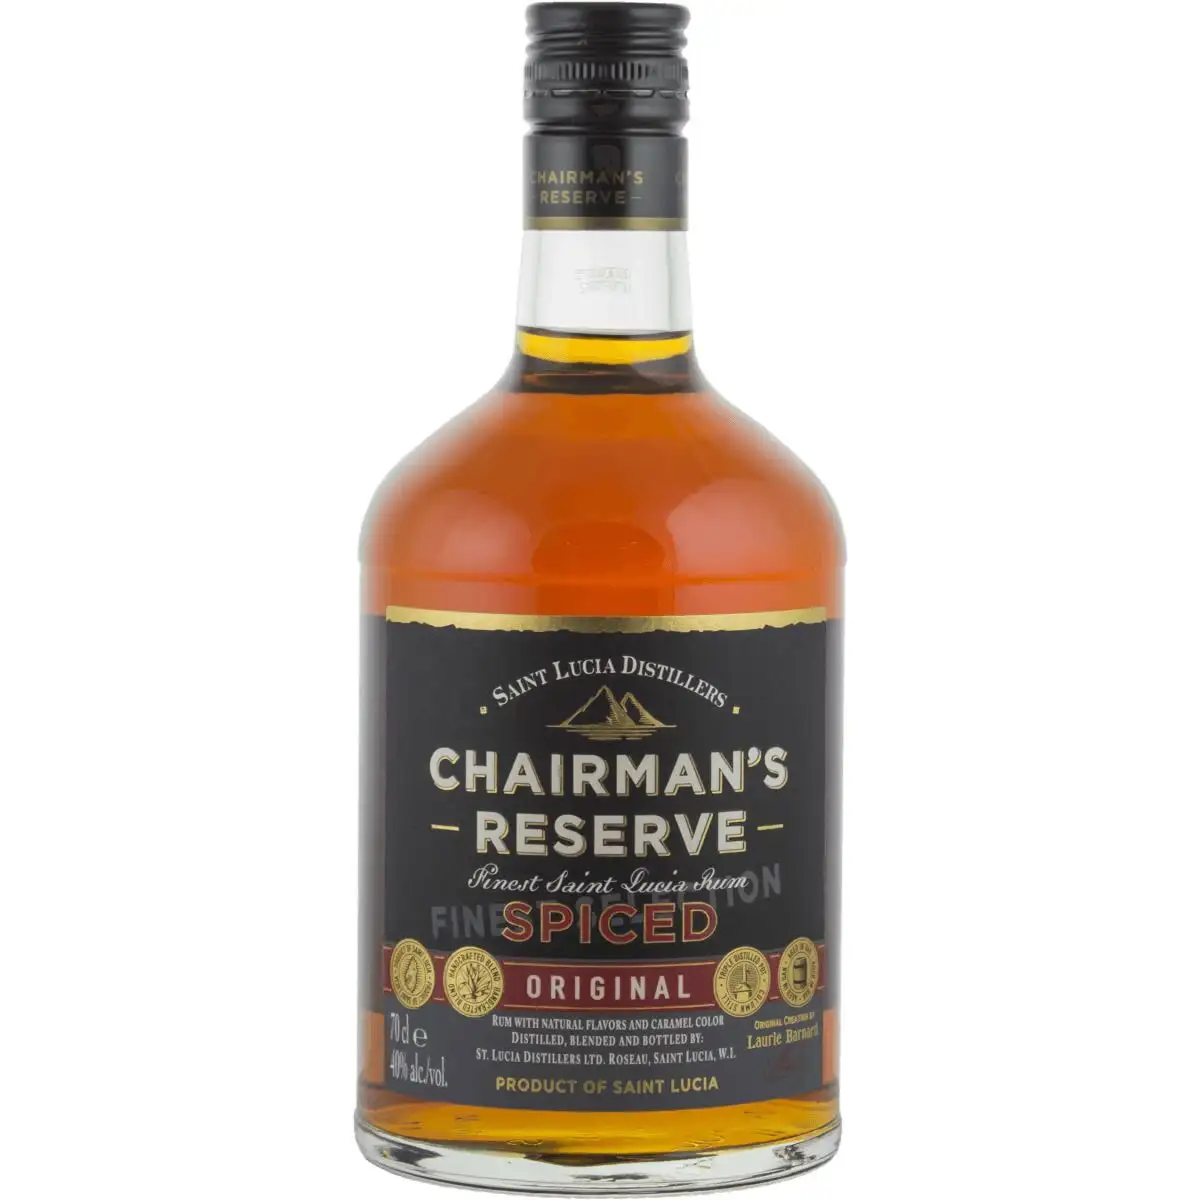 Image of the front of the bottle of the rum Chairman’s Reserve Spiced Original